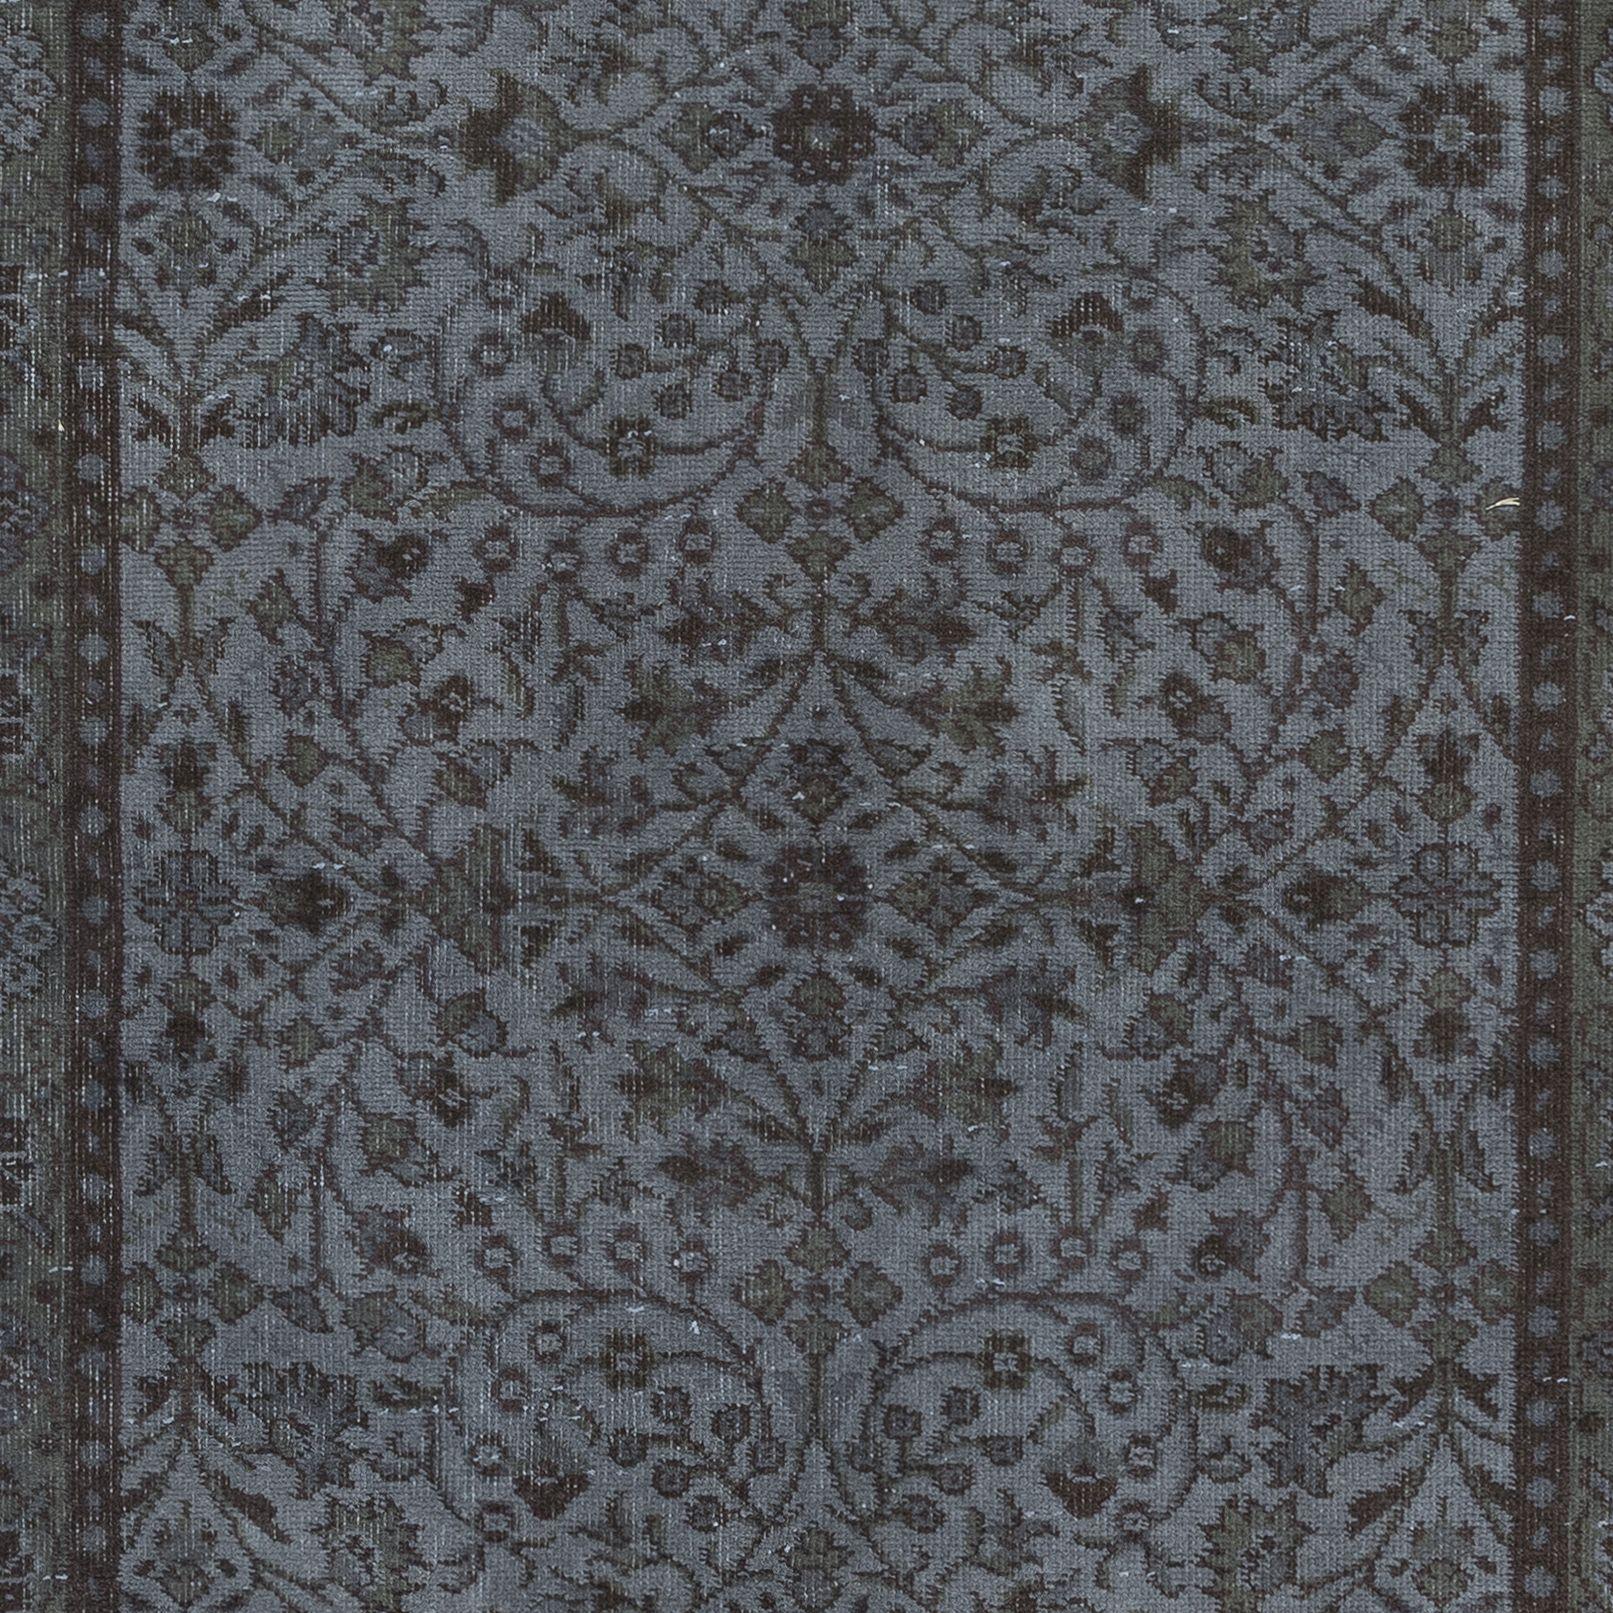 4x7 Ft Dark Gray Modern Area Rug, Handwoven and Handknotted in Isparta, Turkey In Good Condition For Sale In Philadelphia, PA